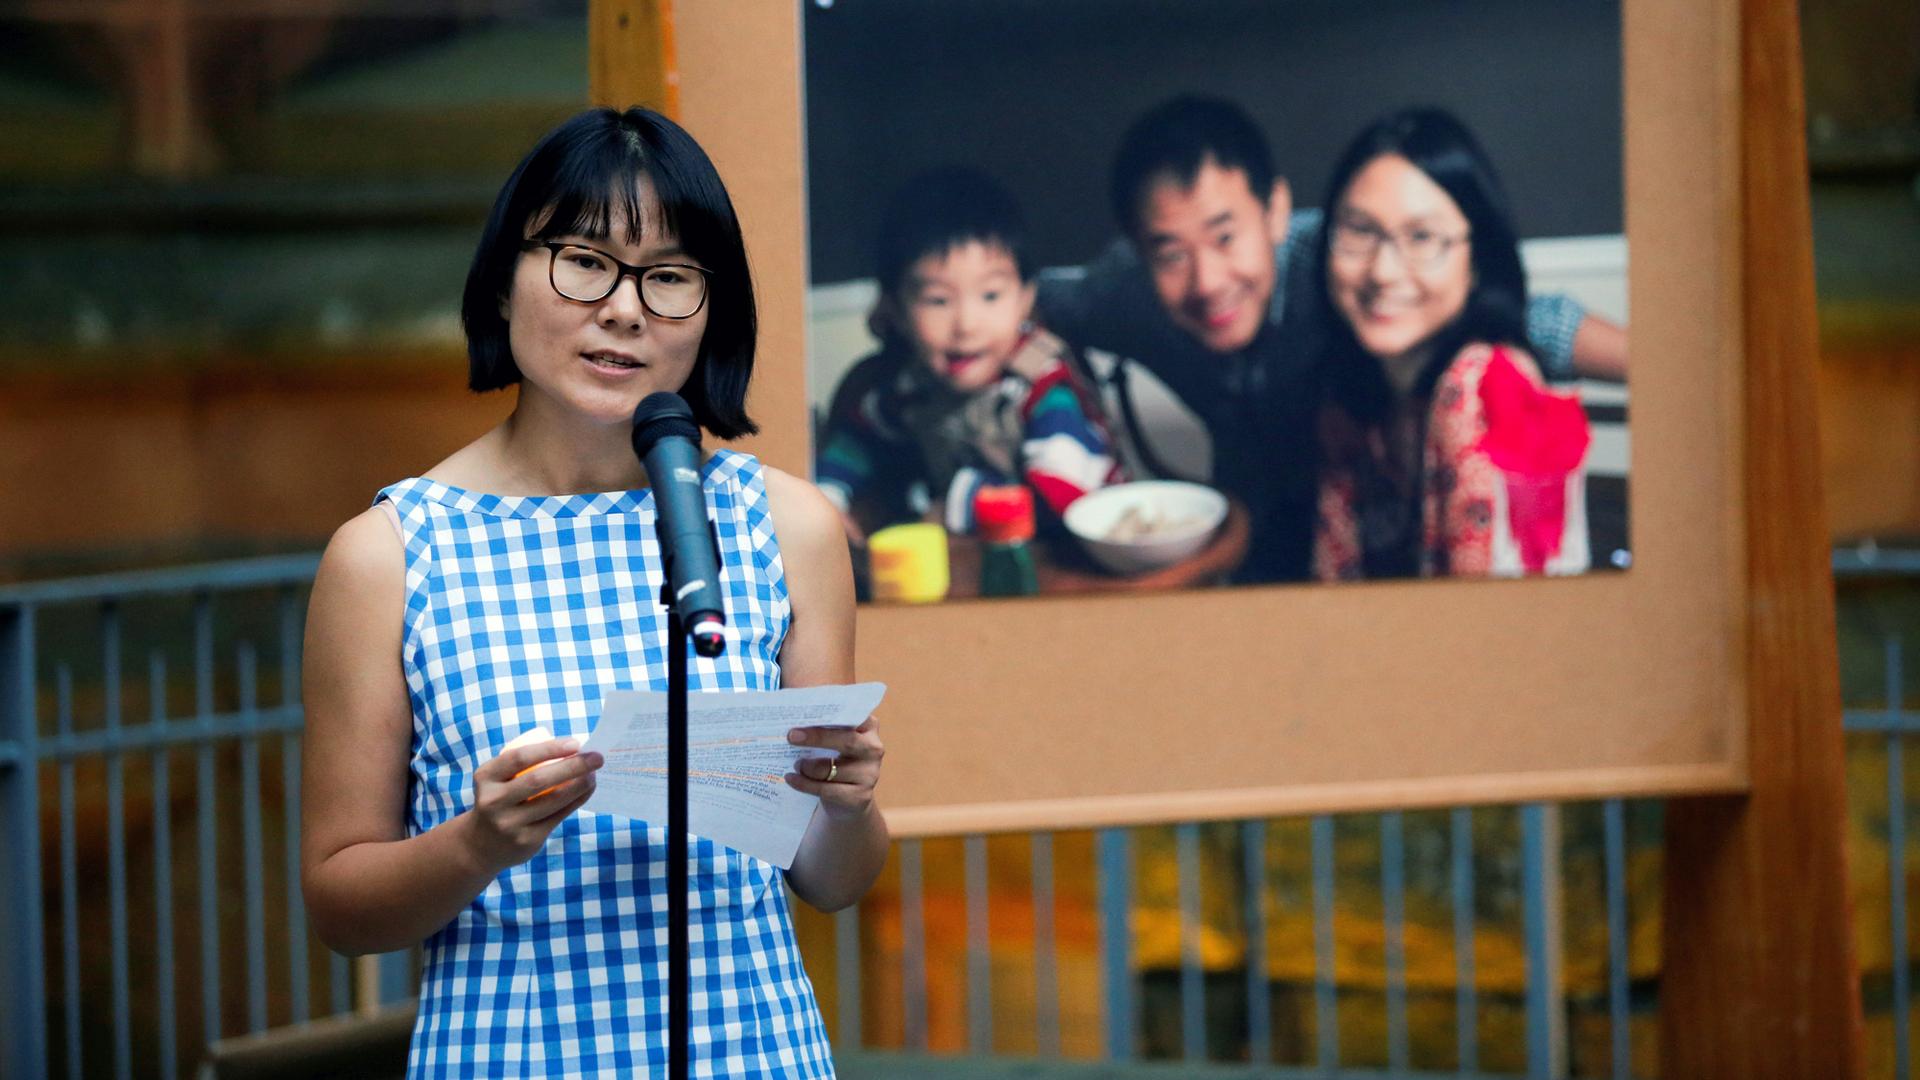 A woman speaks in front of a microphone. Behind her is a large image of her, with her husband and young son.